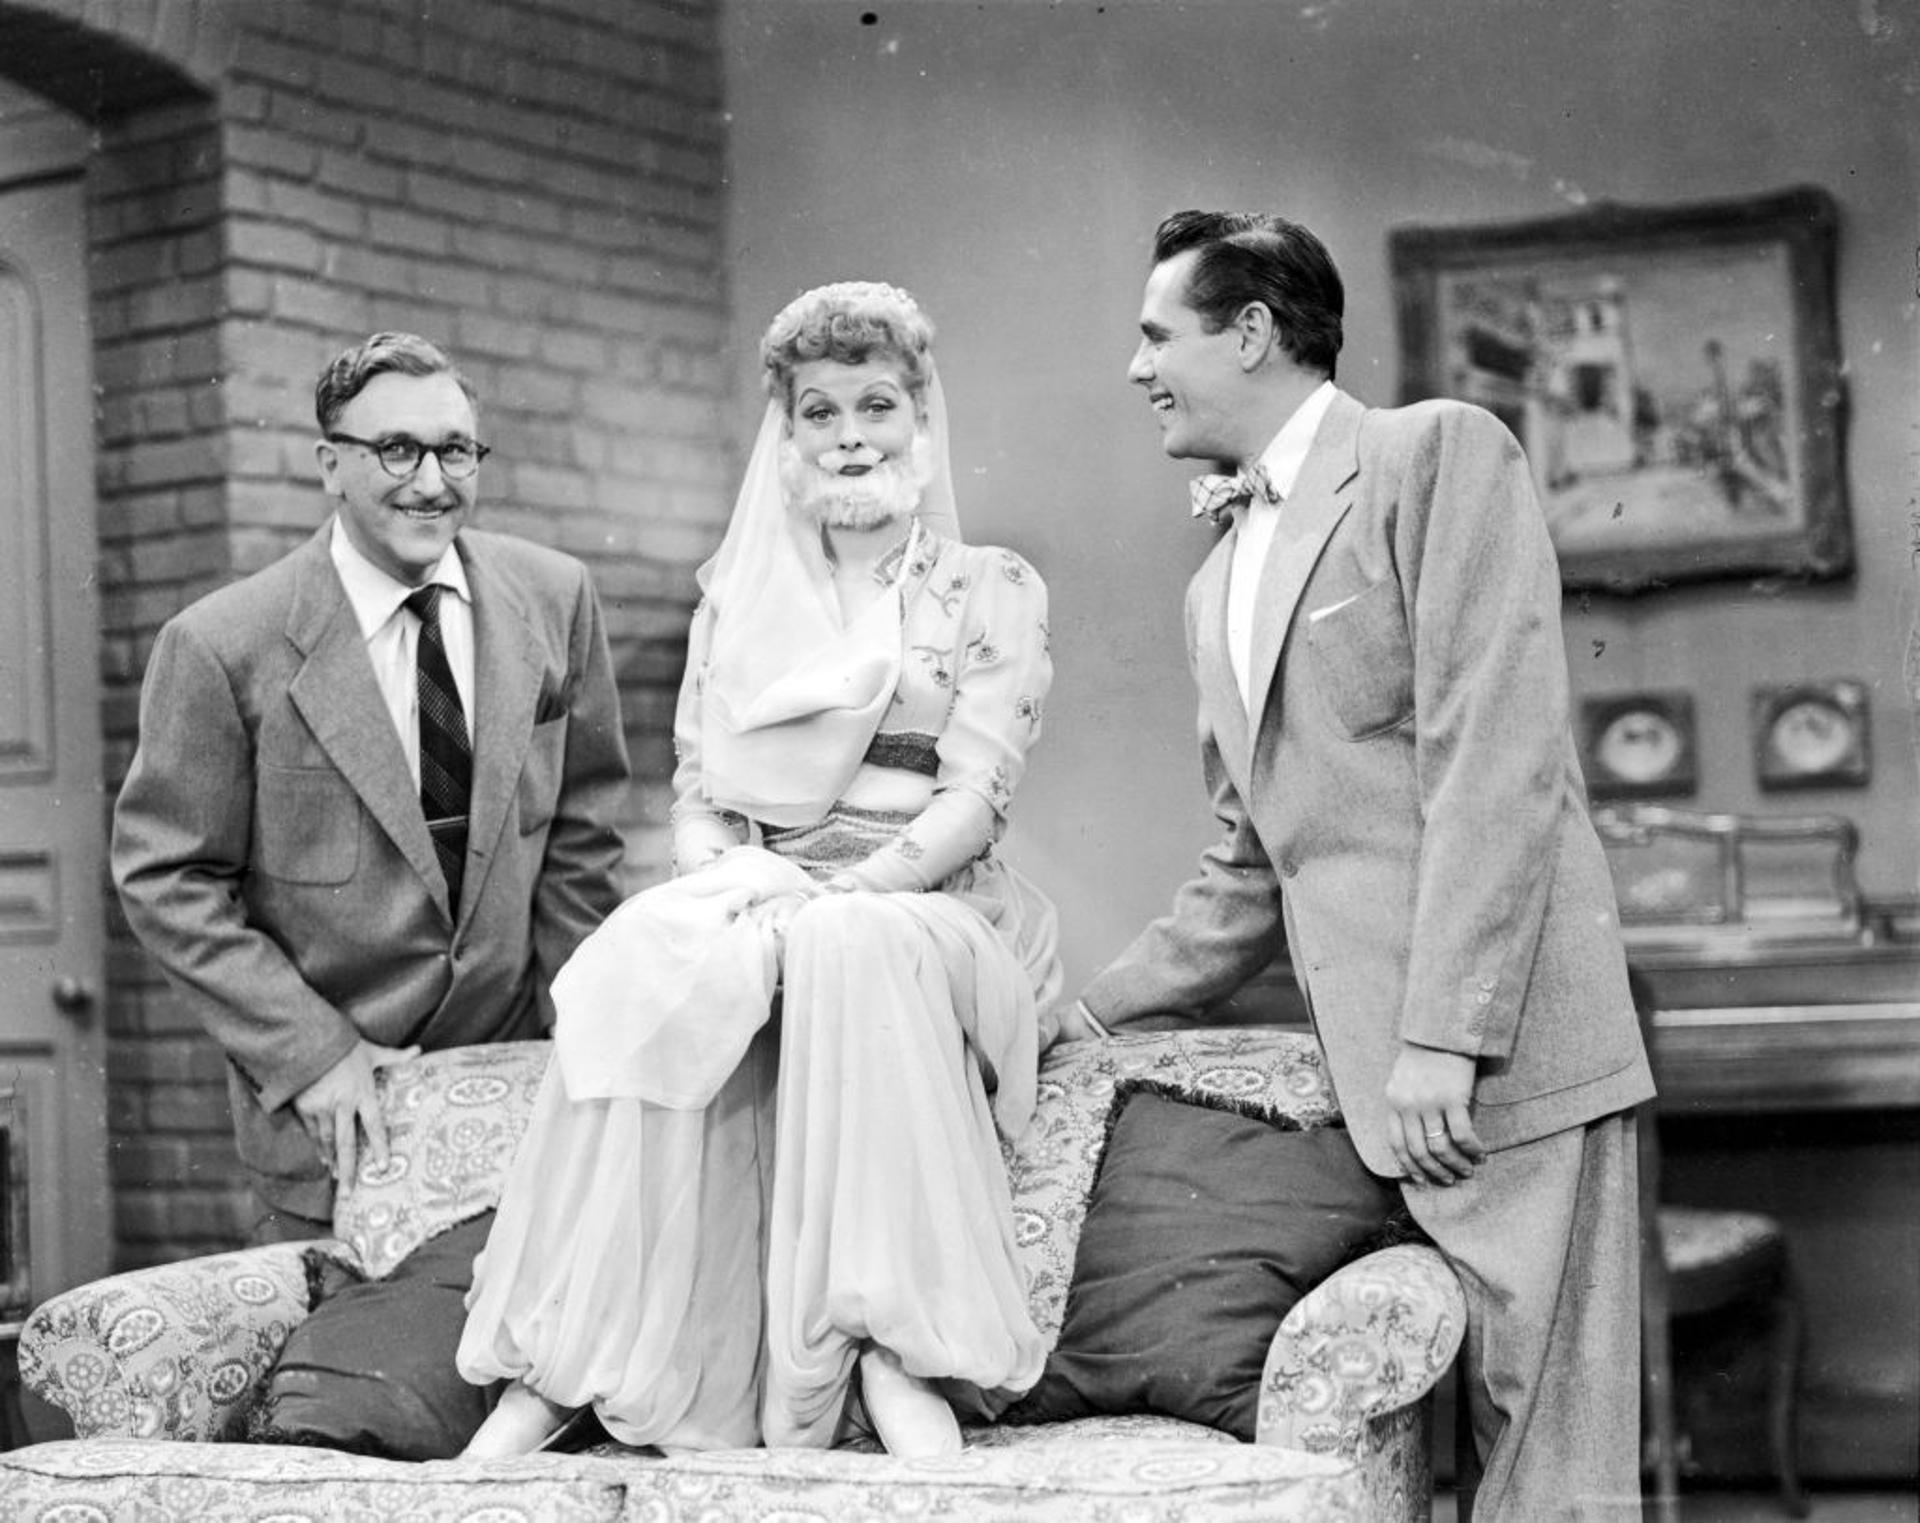 Lucille Ball pictured with a fake moustache during an episode of the sitcom “I Love Lucy”